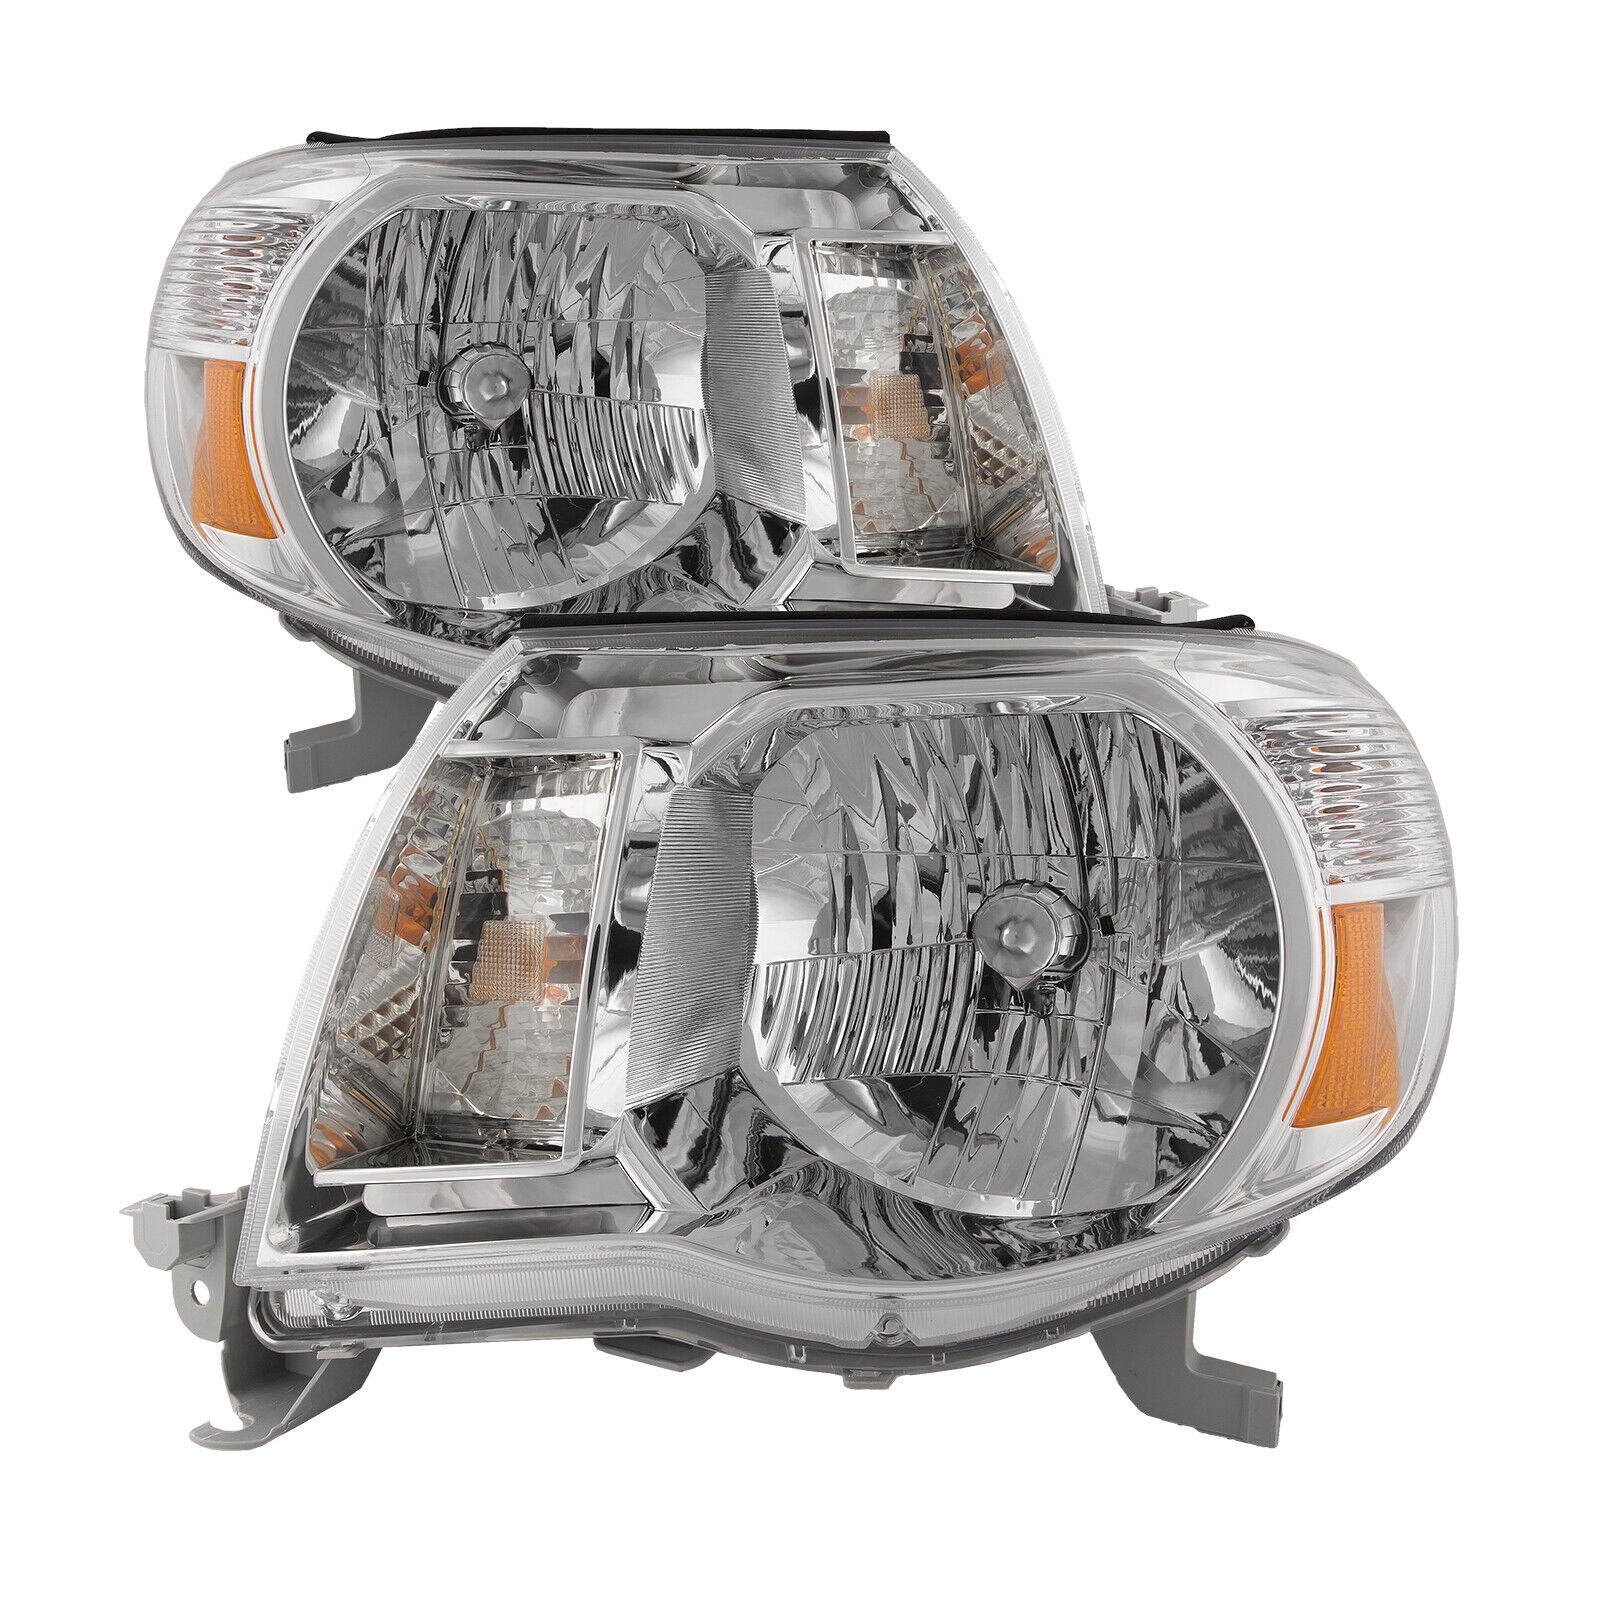 Fits Itasca Suncruiser 2014-2015 Motorhome RV Left and Right Headlights Pair